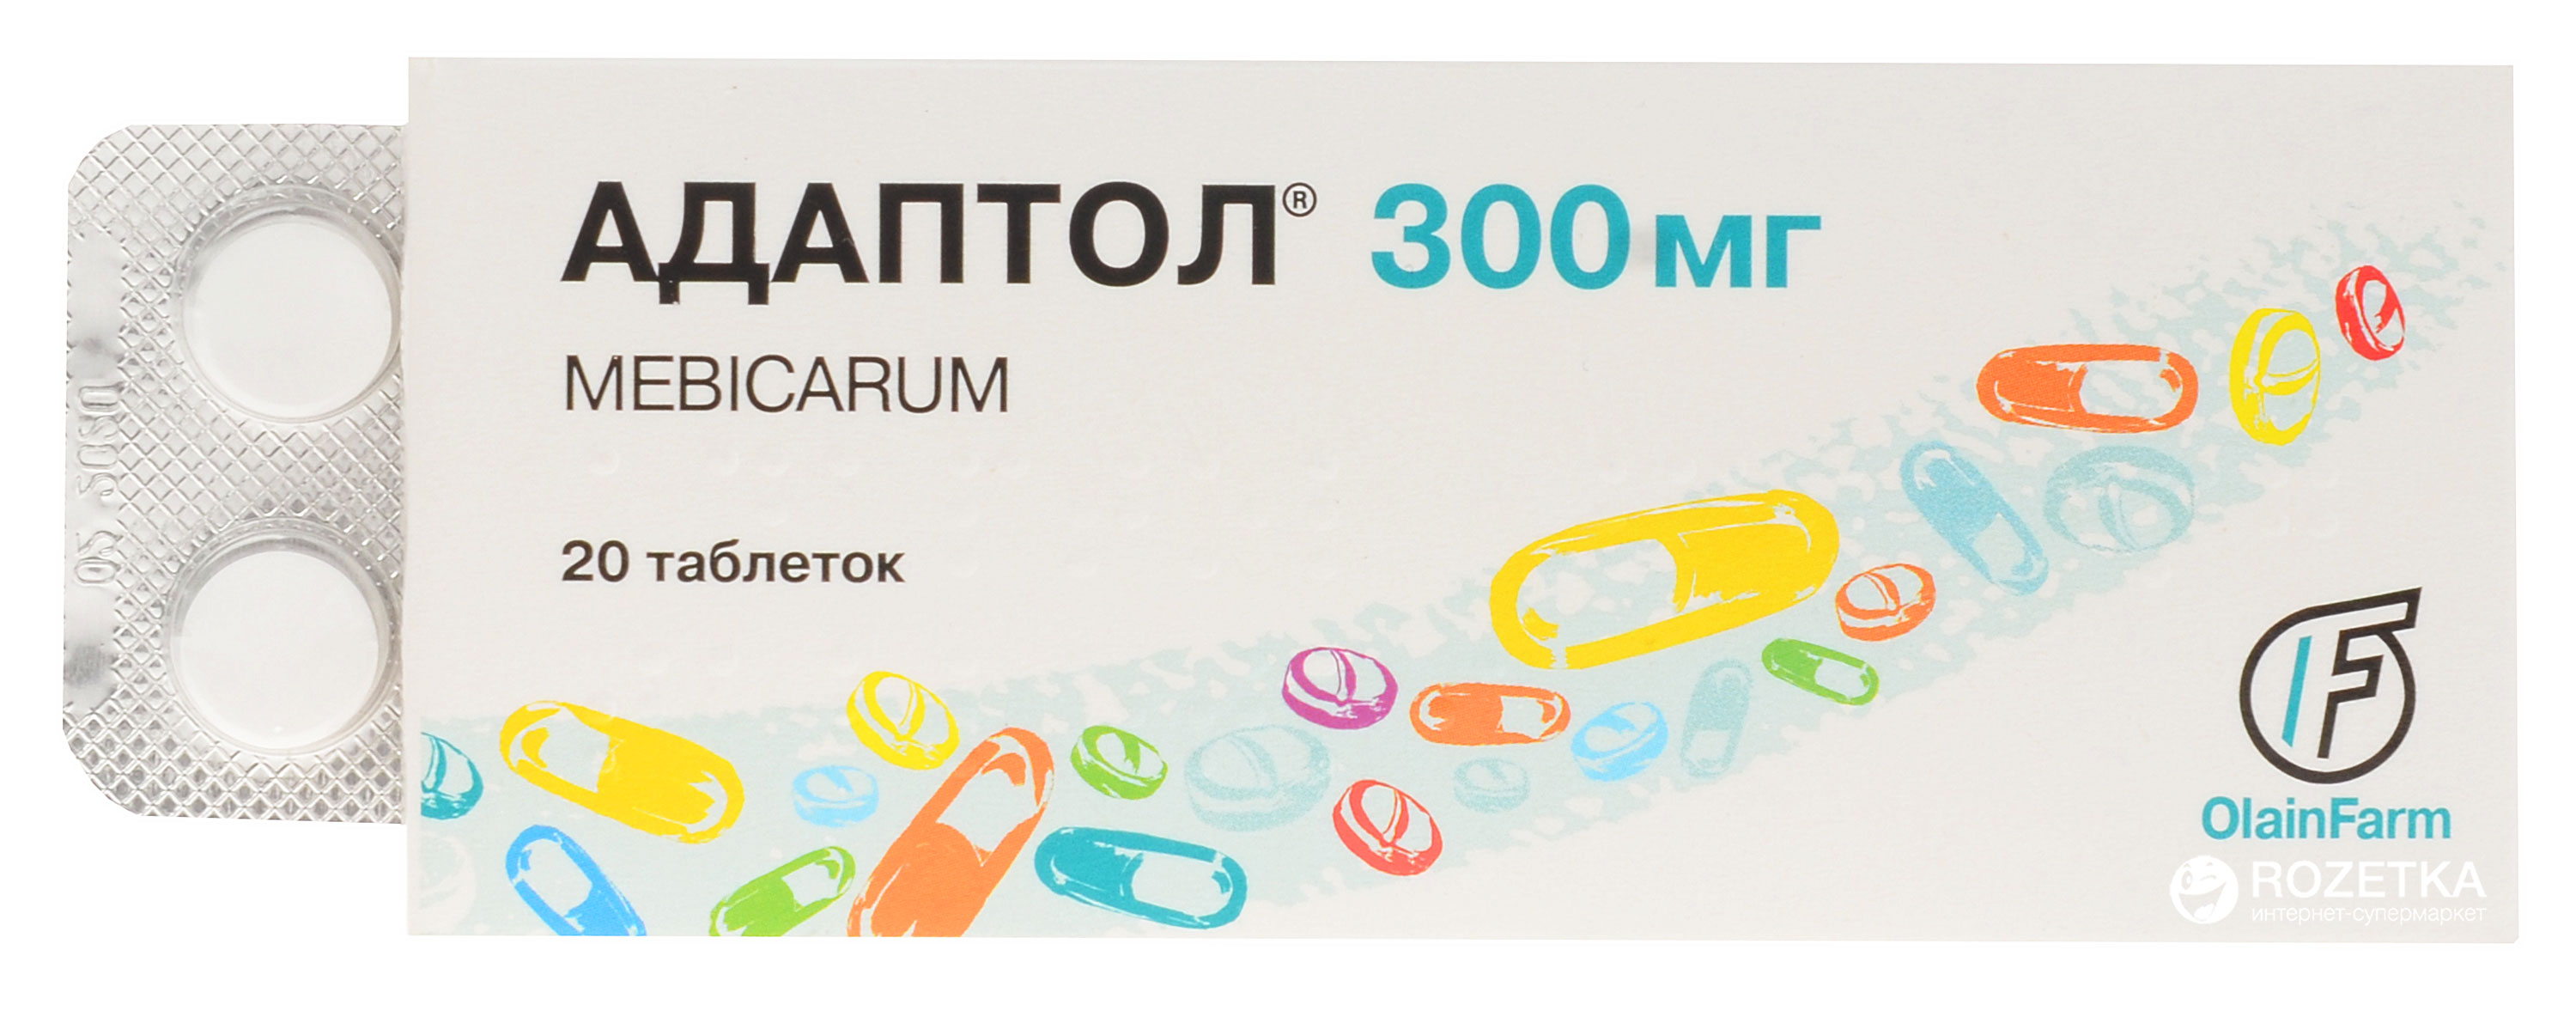 Adaptol - instructions, dosage, side effects, analogs